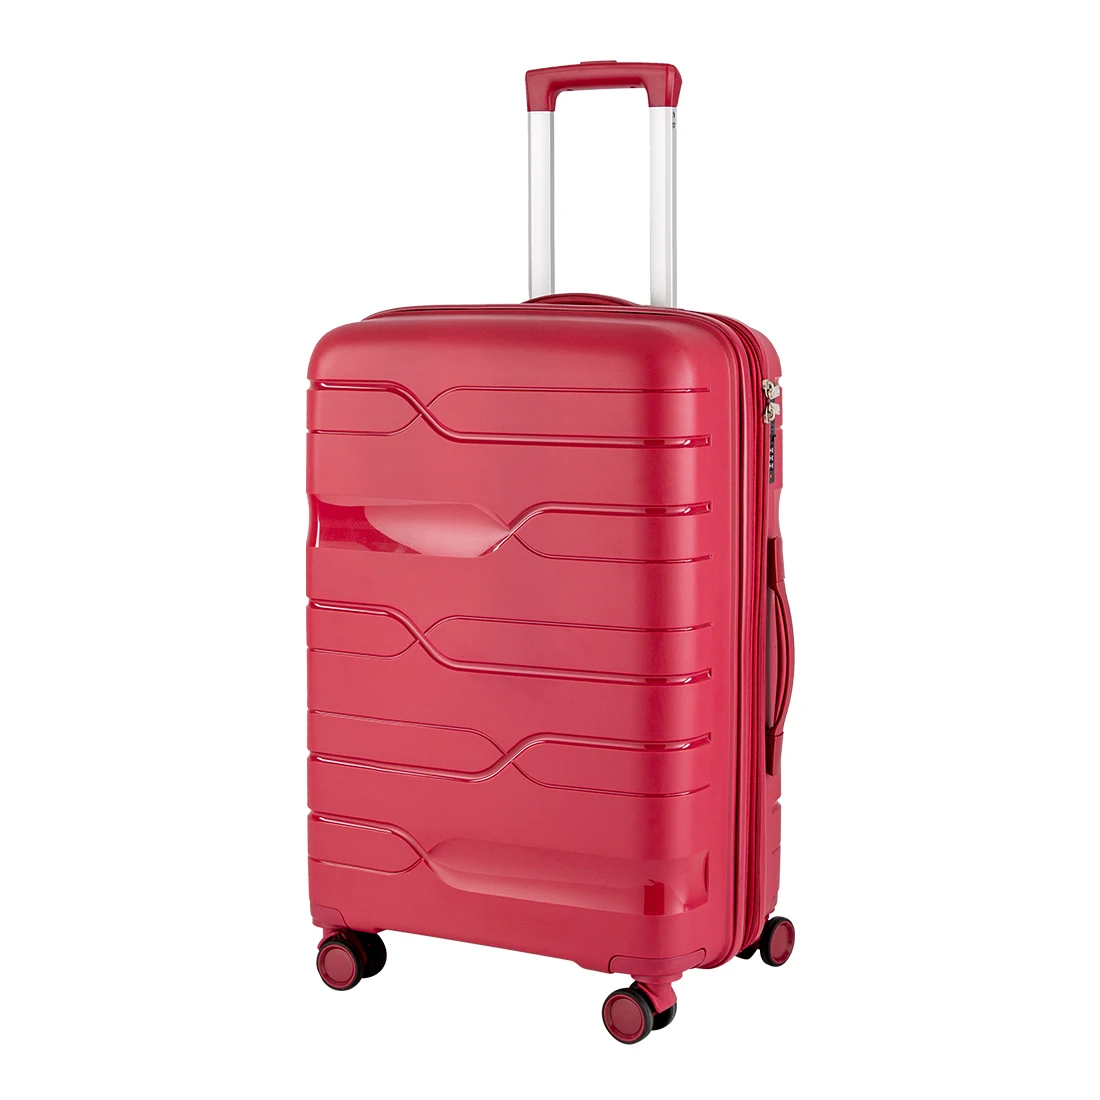 

Customized Economic 3 pieces Travel Luggage Sets 20/24/28 inch Hardside Trolley PP Suitcase, Accept customized color